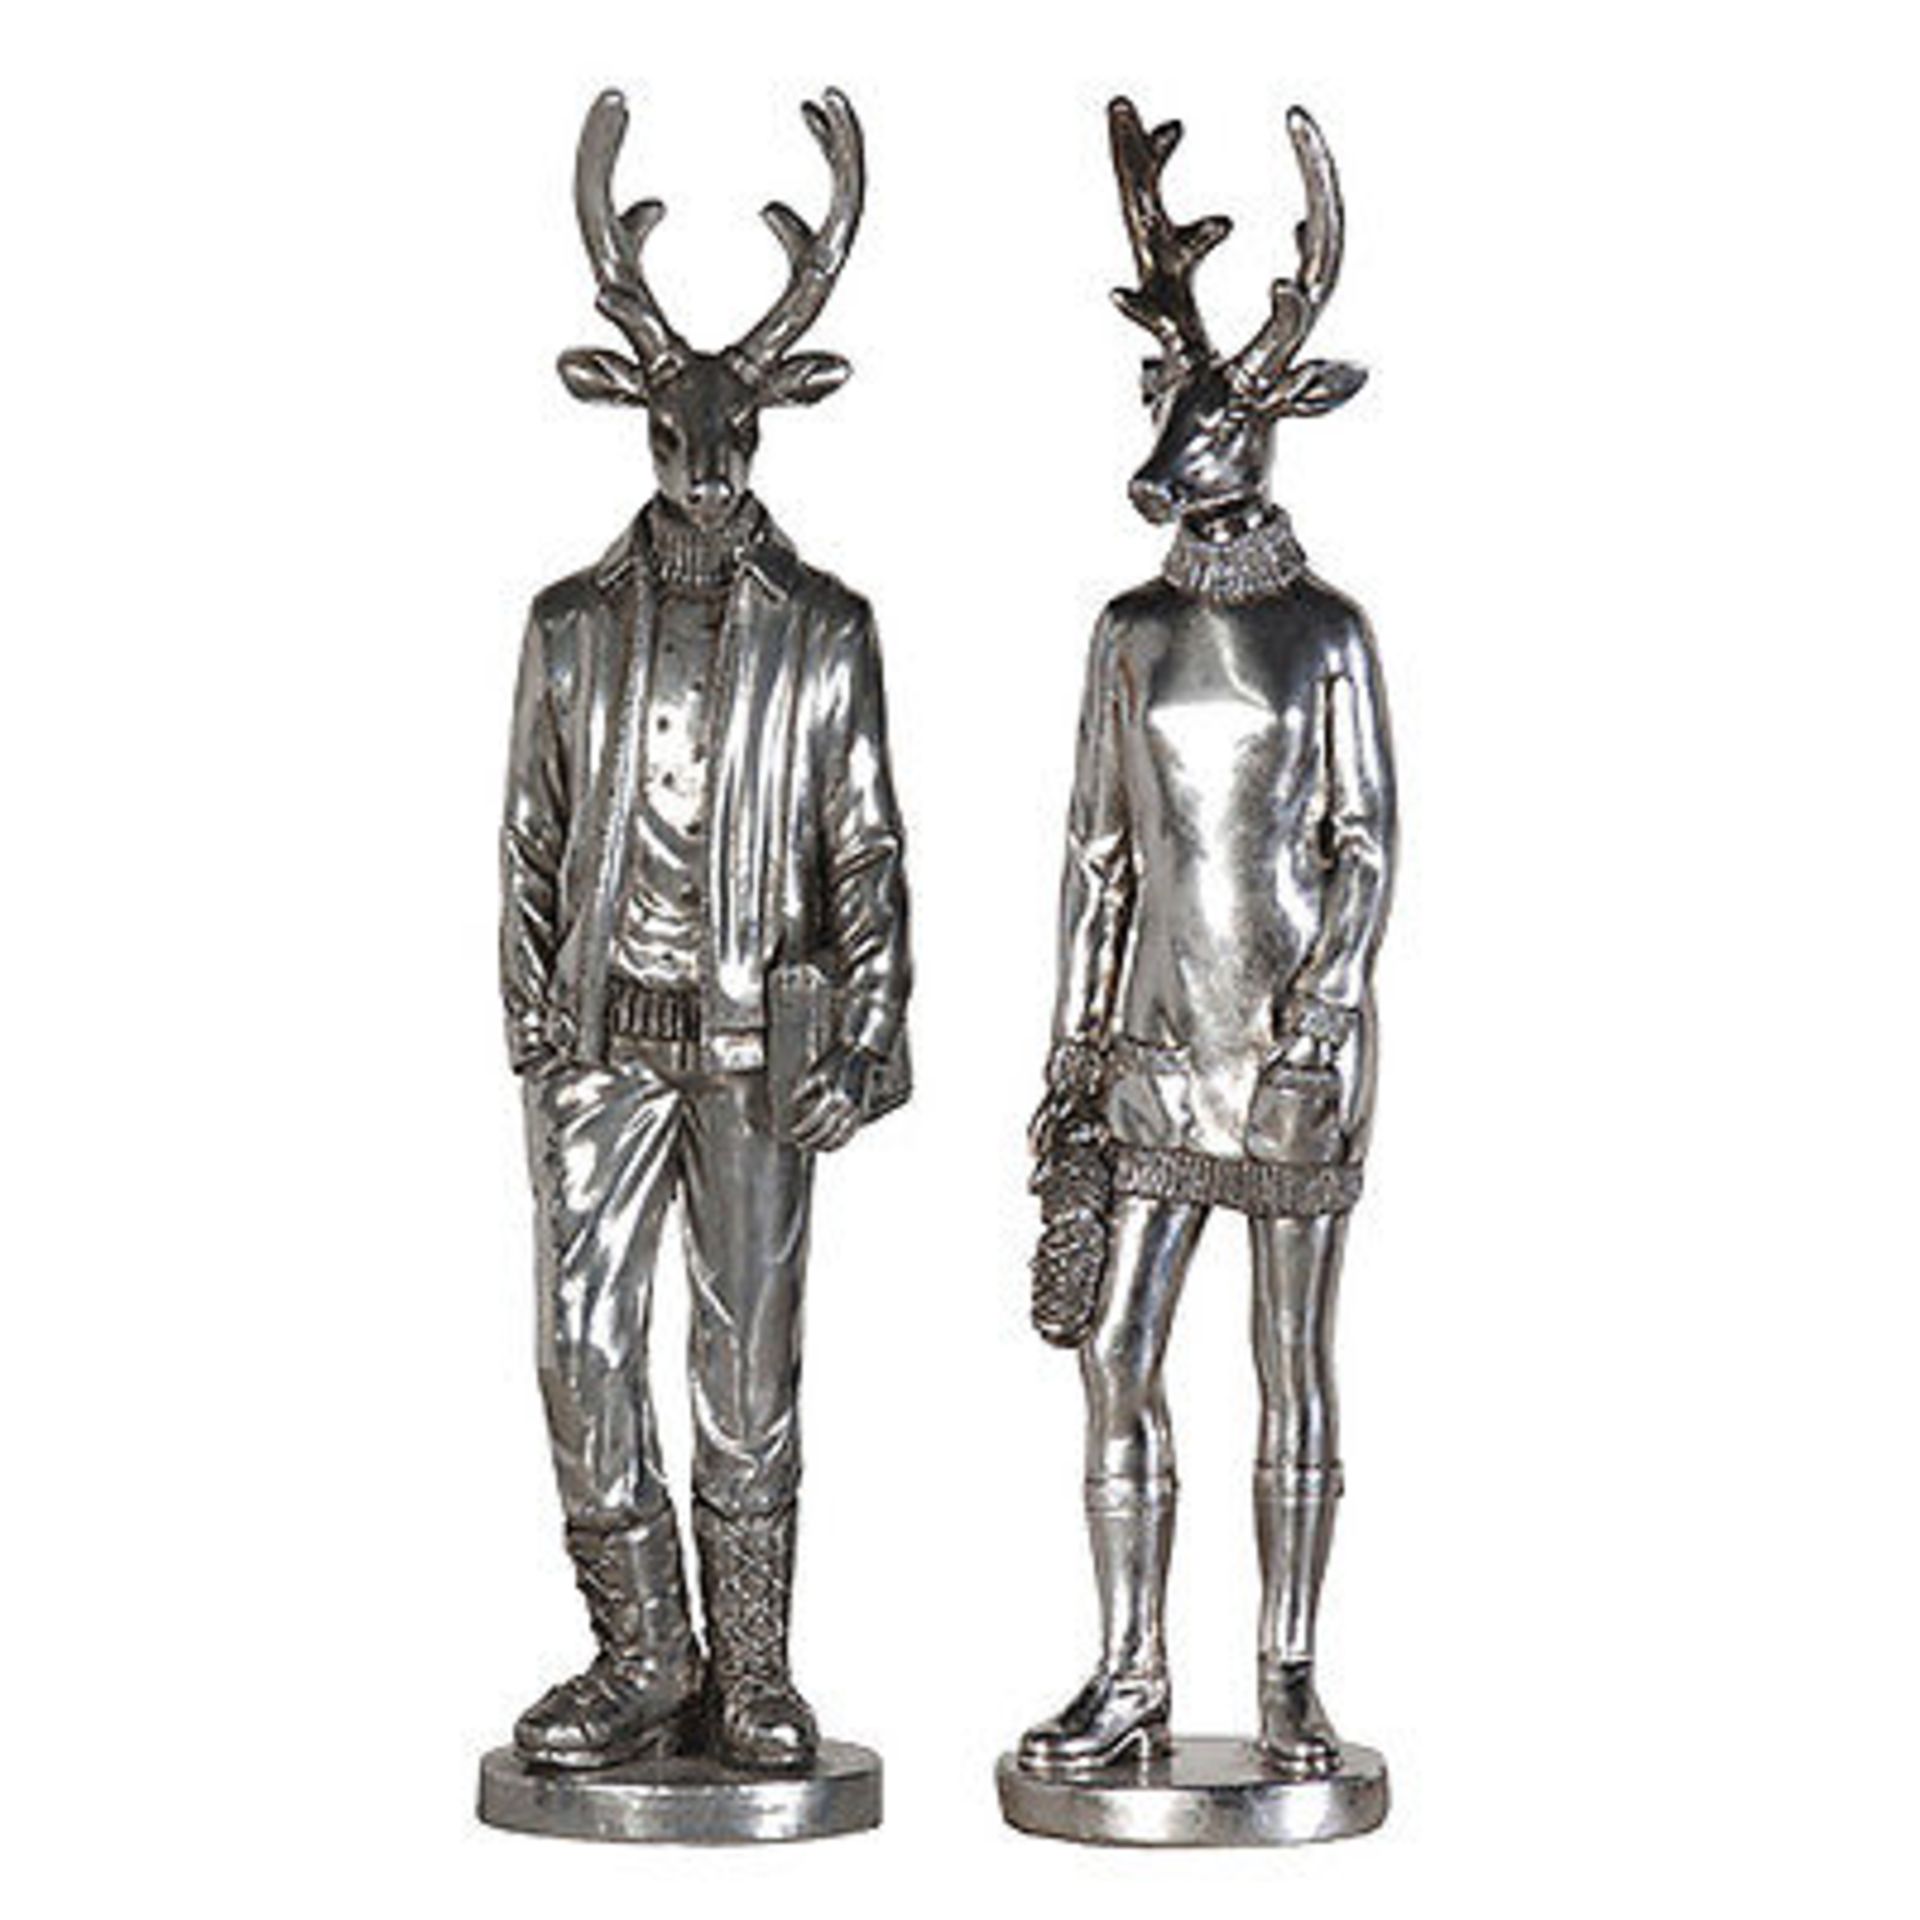 73 X PLAQUES/SIGNS, MR AND MRS REINDEER FIGURINES, ETC. RRP £ 673.10 - Image 6 of 9